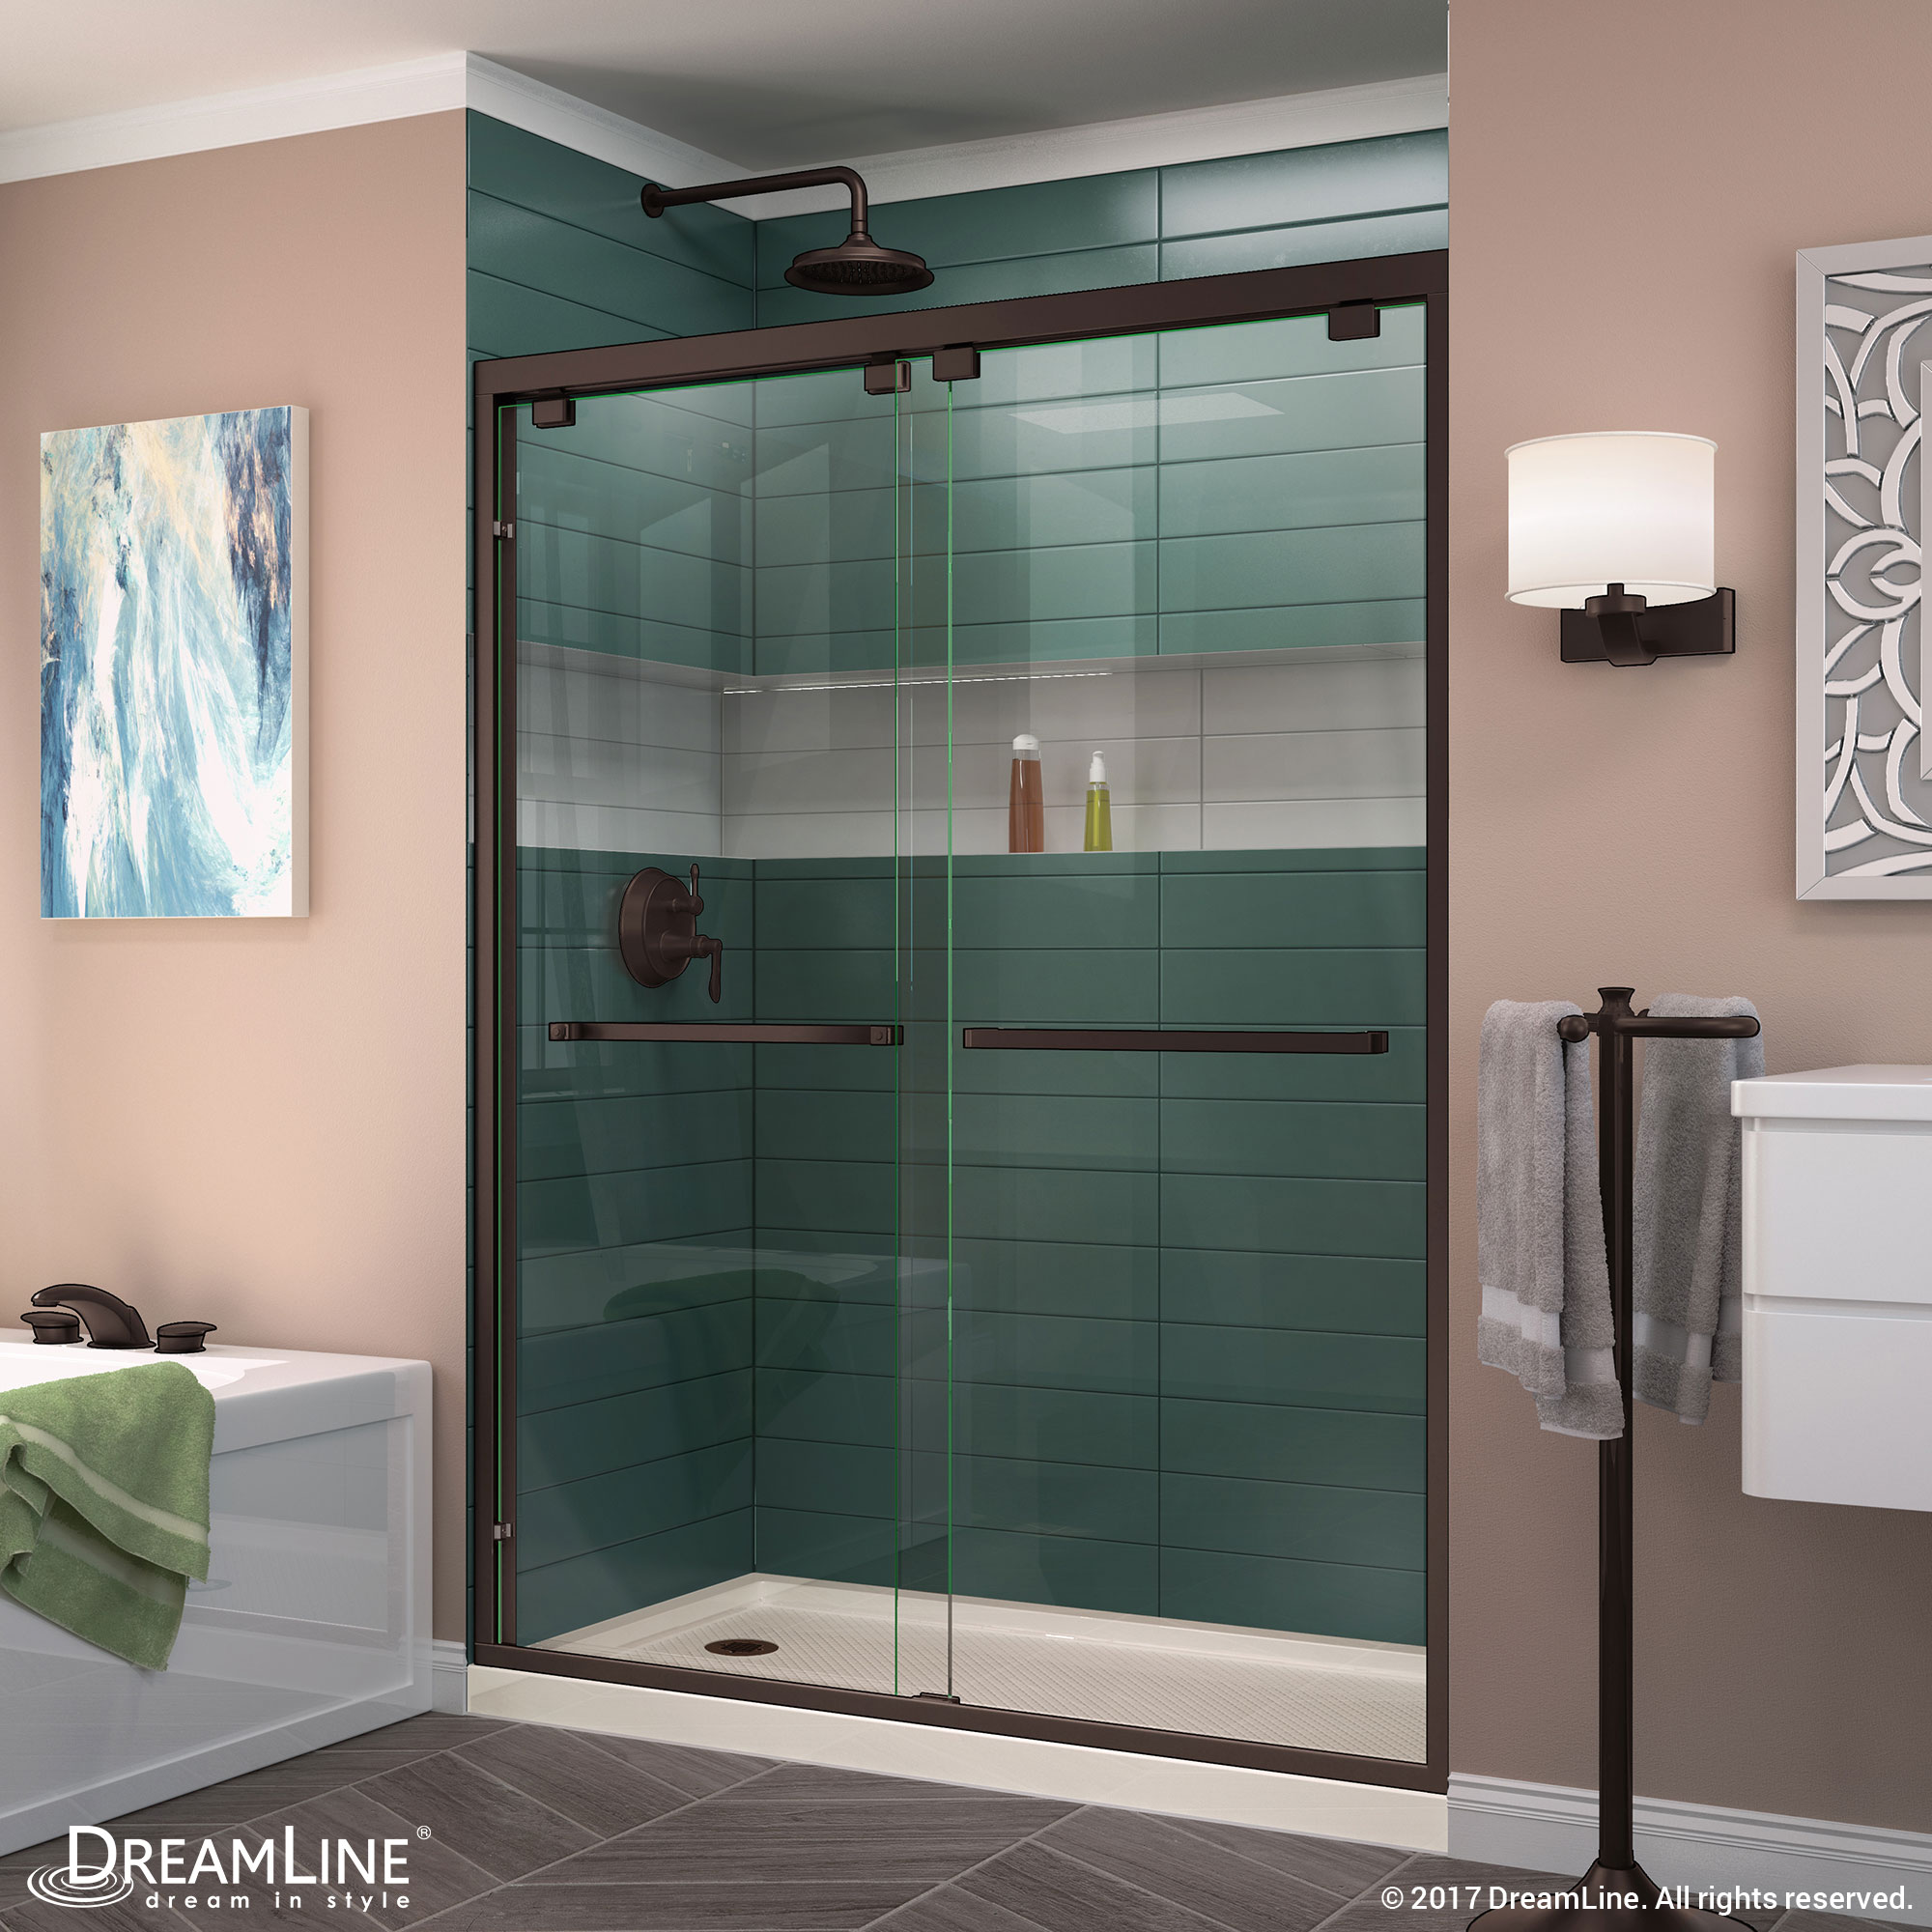 DreamLine Encore 32 in. D x 60 in. W x 78 3/4 in. H Bypass Shower Door in Brushed Nickel and Left Drain Biscuit Base Kit